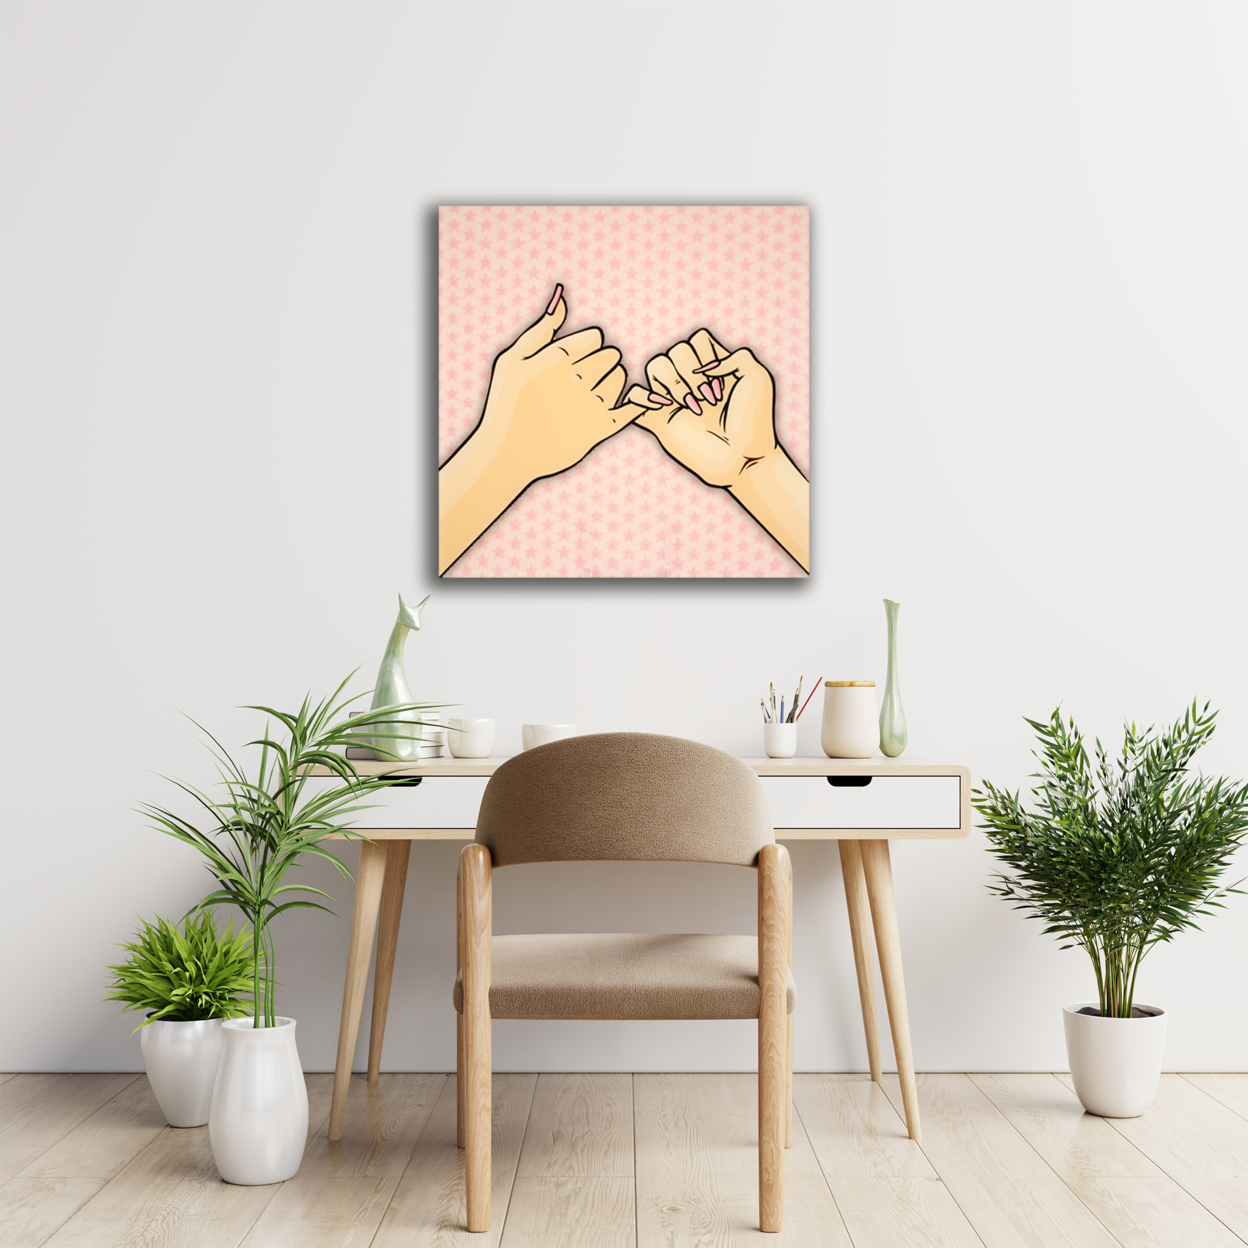 Matashi 5D Multi-Dimensional Wall Art - Custom Made Pinky Promise Wall Art Print On Strong Polycarbonate Panel W/ Vibrant Colors (16x16 In)